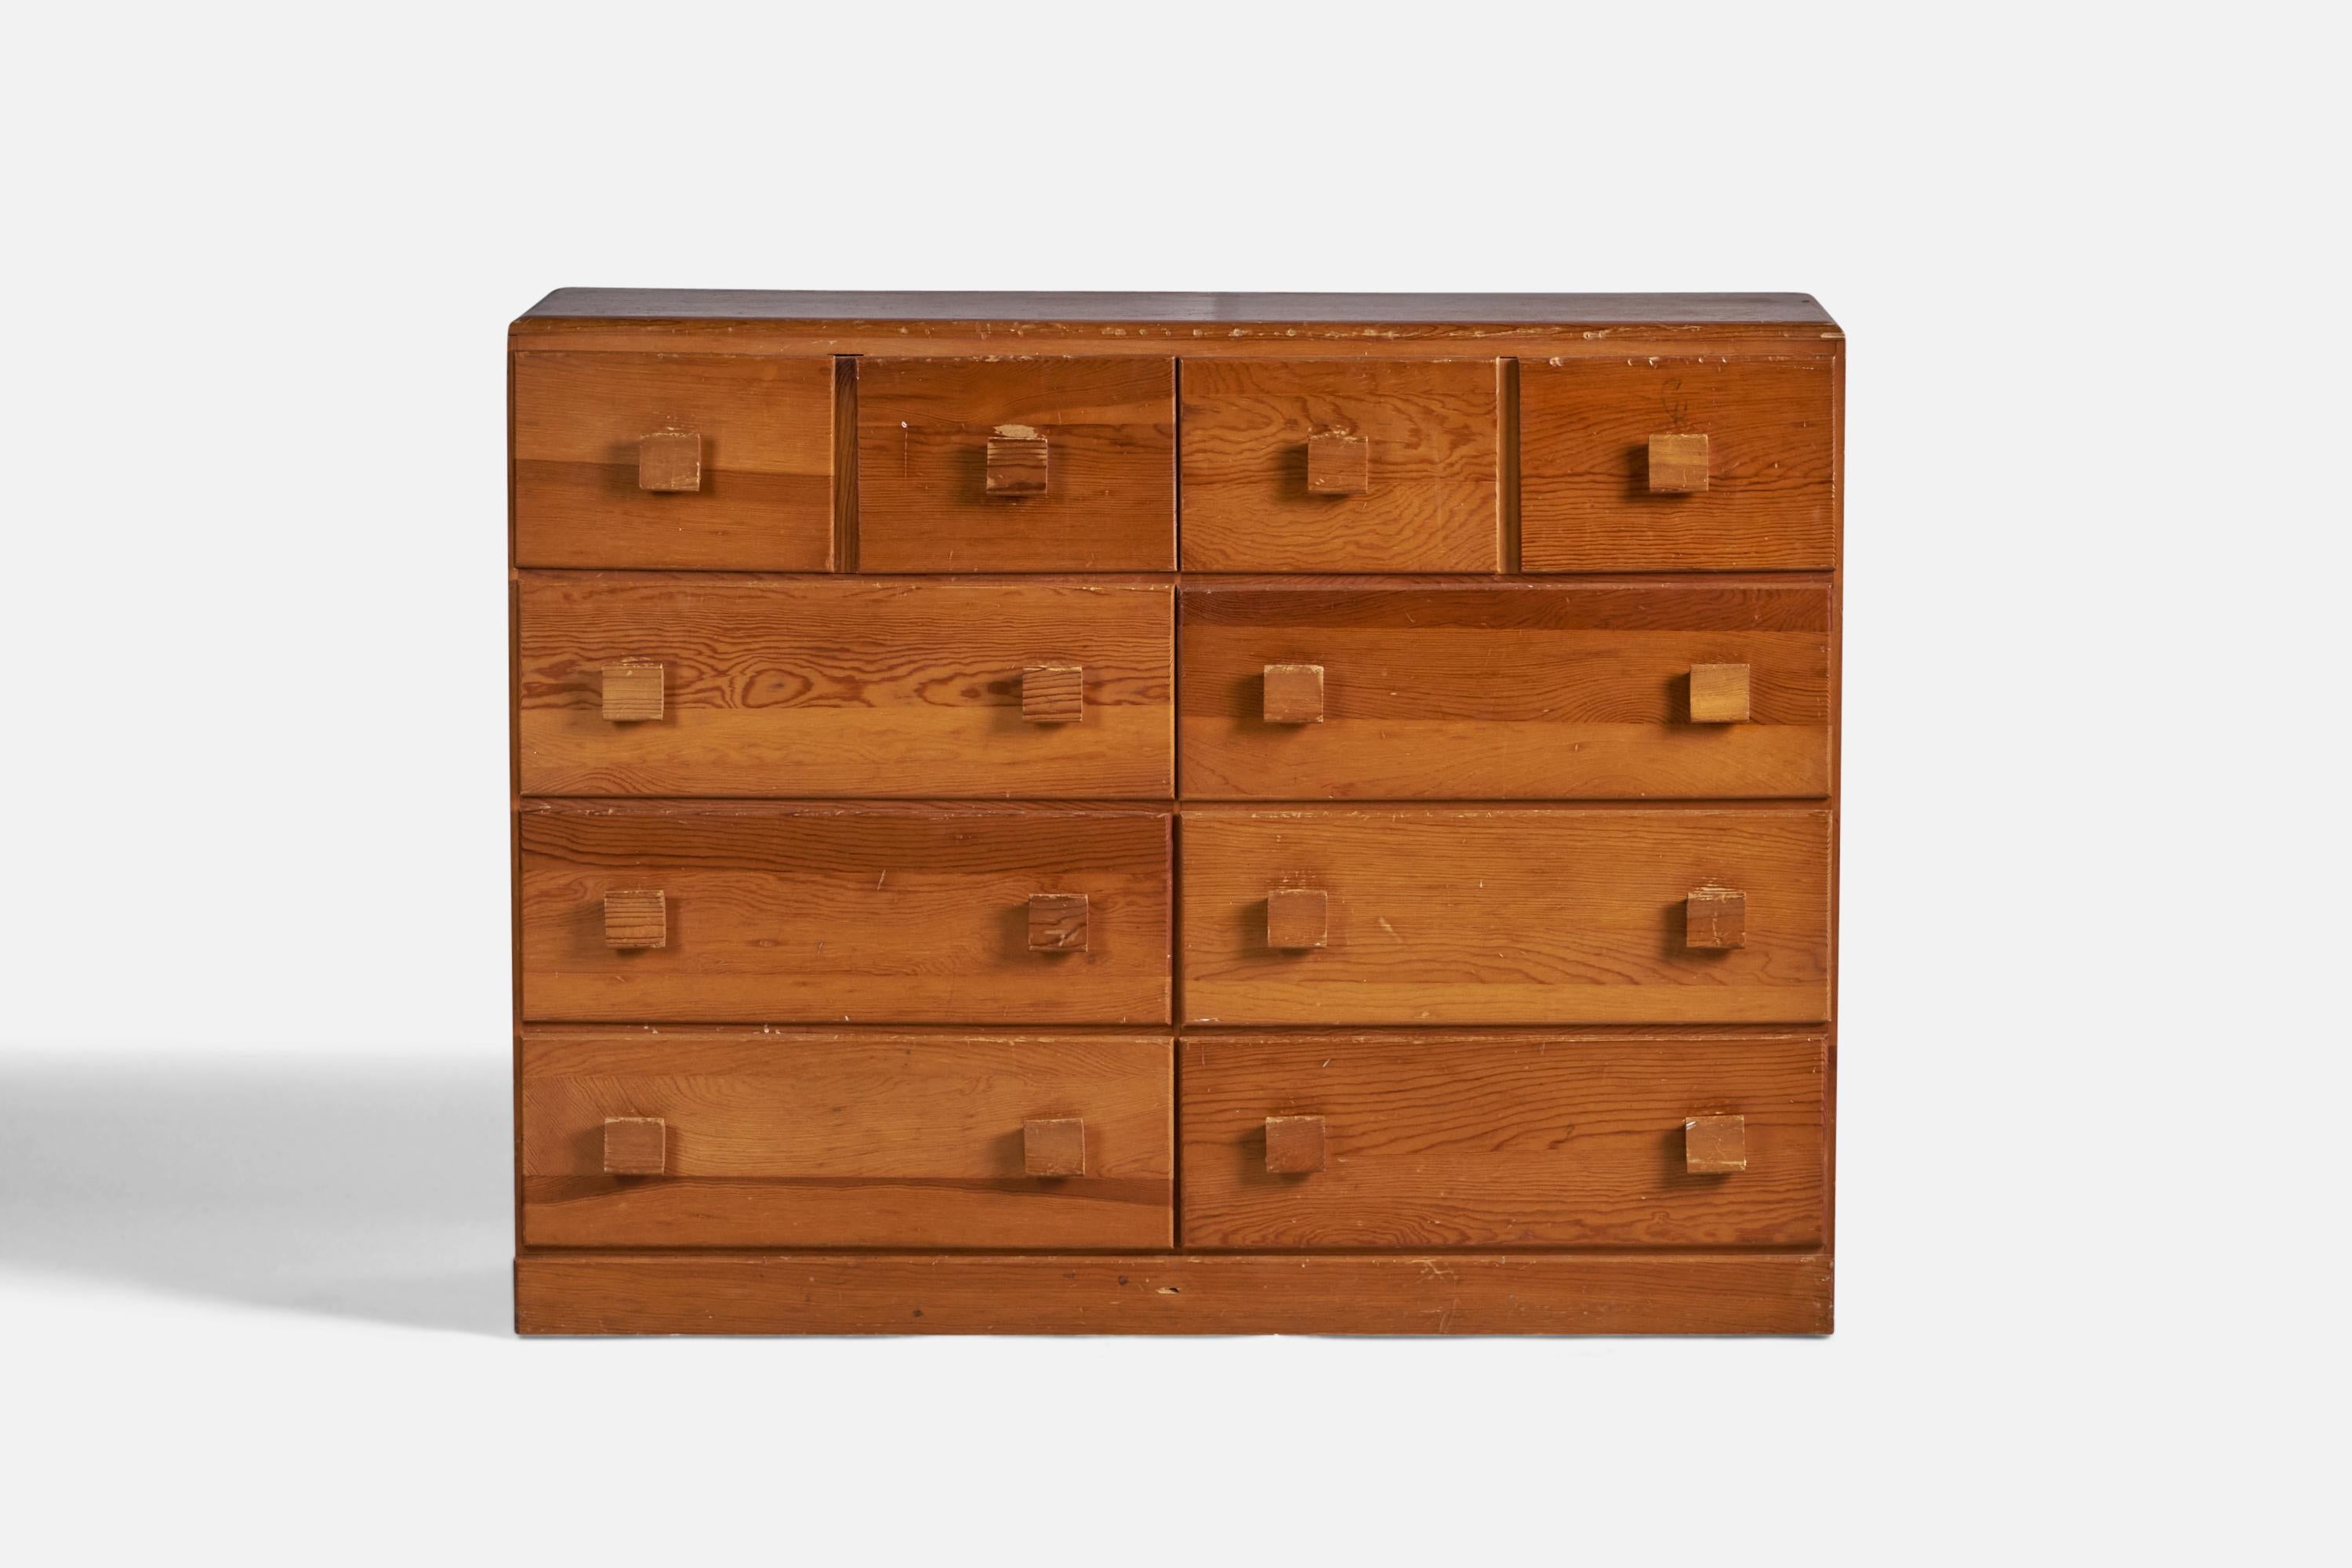 An oak chest of drawers designed and produced in the US, c. 1940s.
